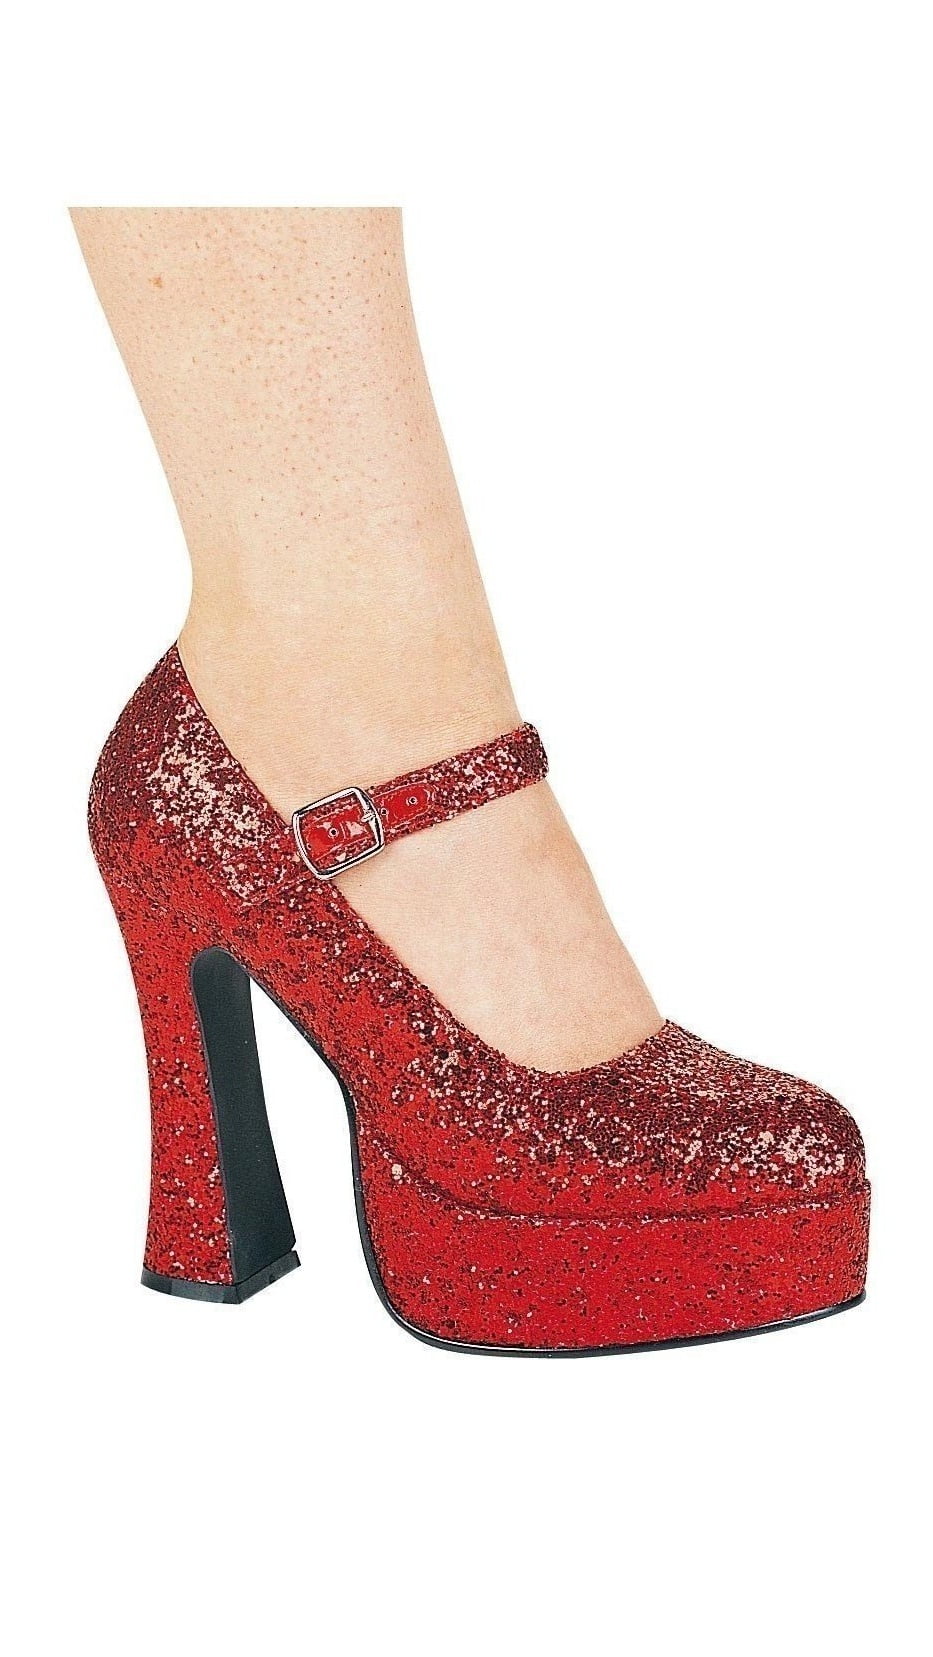 SO CLASSY Red Closed Toe Mary Jane Style High Heels BARBIE Shoes 